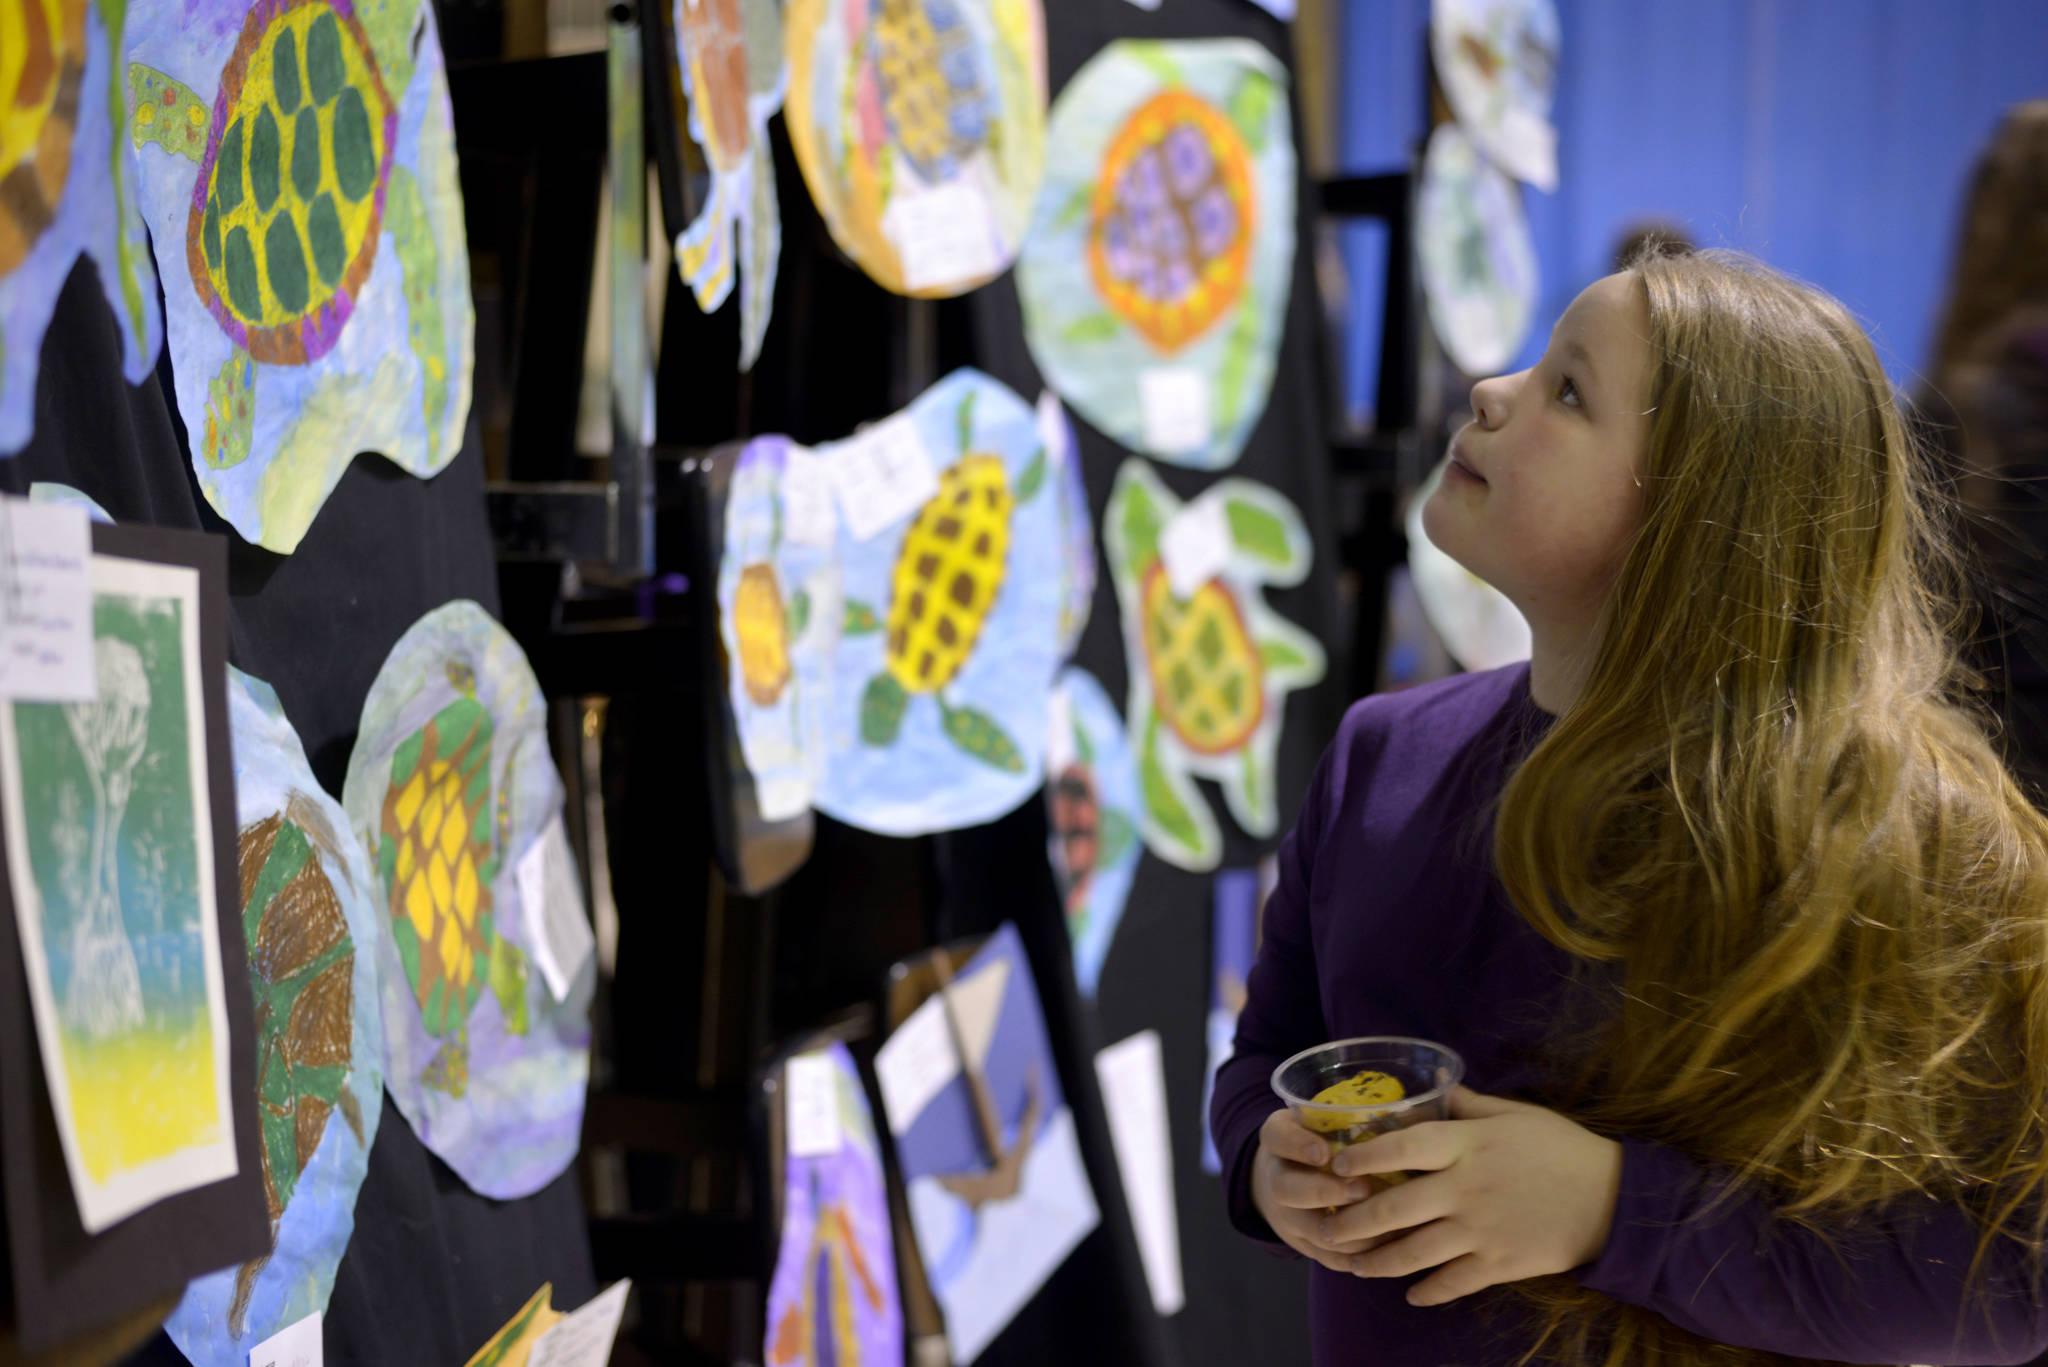 Shelby Moore, 9, went through the rows of art created by her fellow Mountain View Elementary School students at an “Evening of Art” on Thursday, March 2. She stopped to look more closely at the oil pastel turtles created by fifth-graders.